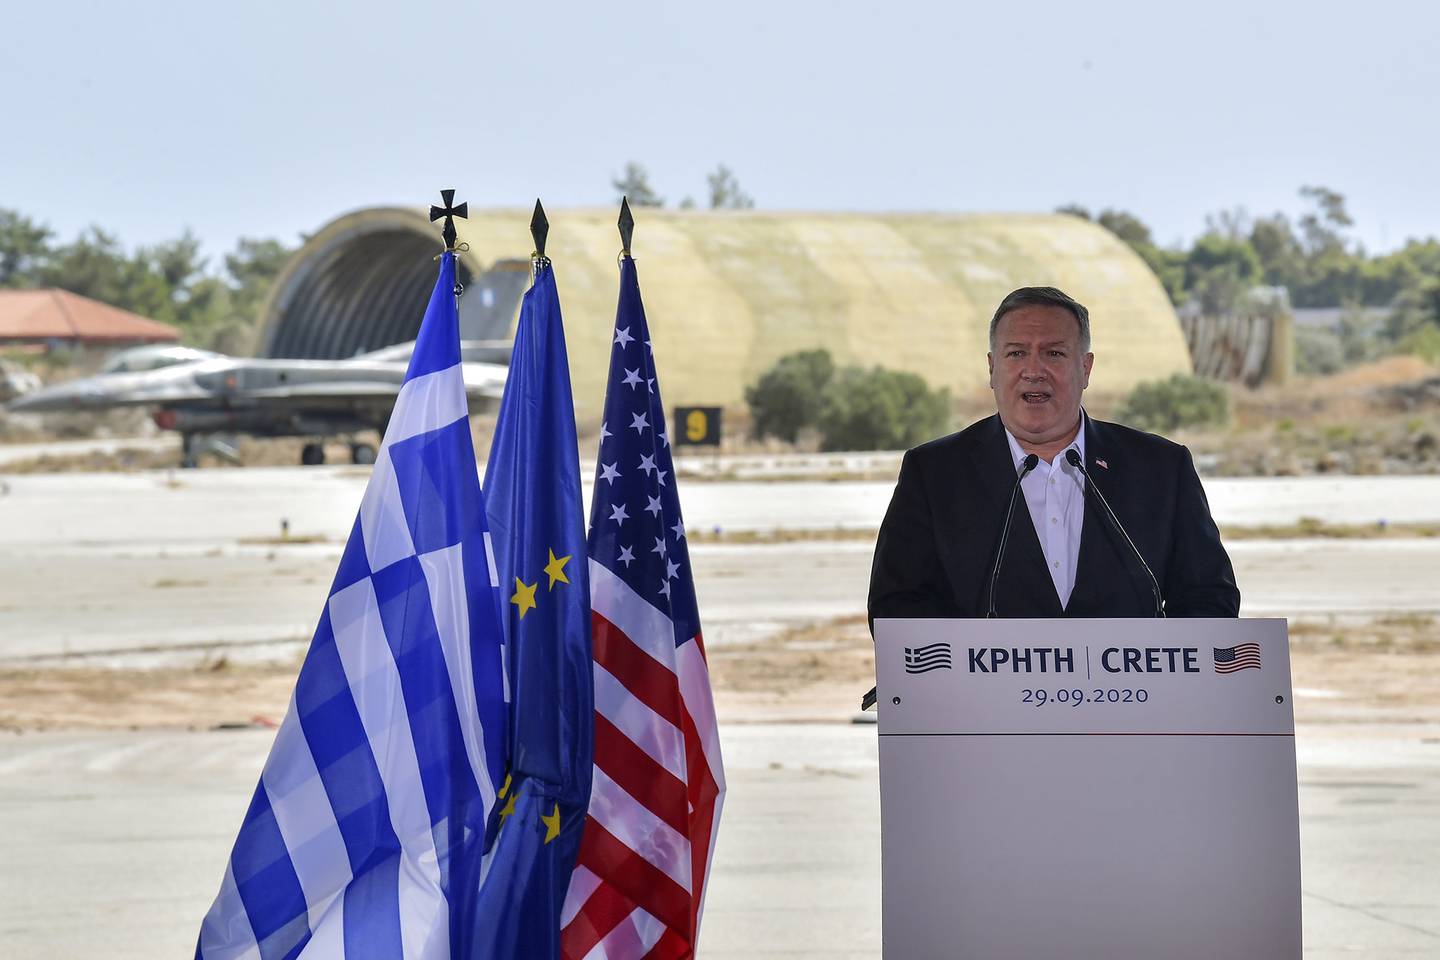 US Secretary of State Mike Pompeo delivers a speech during his visit at the Naval Support Activity base at Souda, on the Greek island of Crete, Tuesday, Sept. 29, 2020.